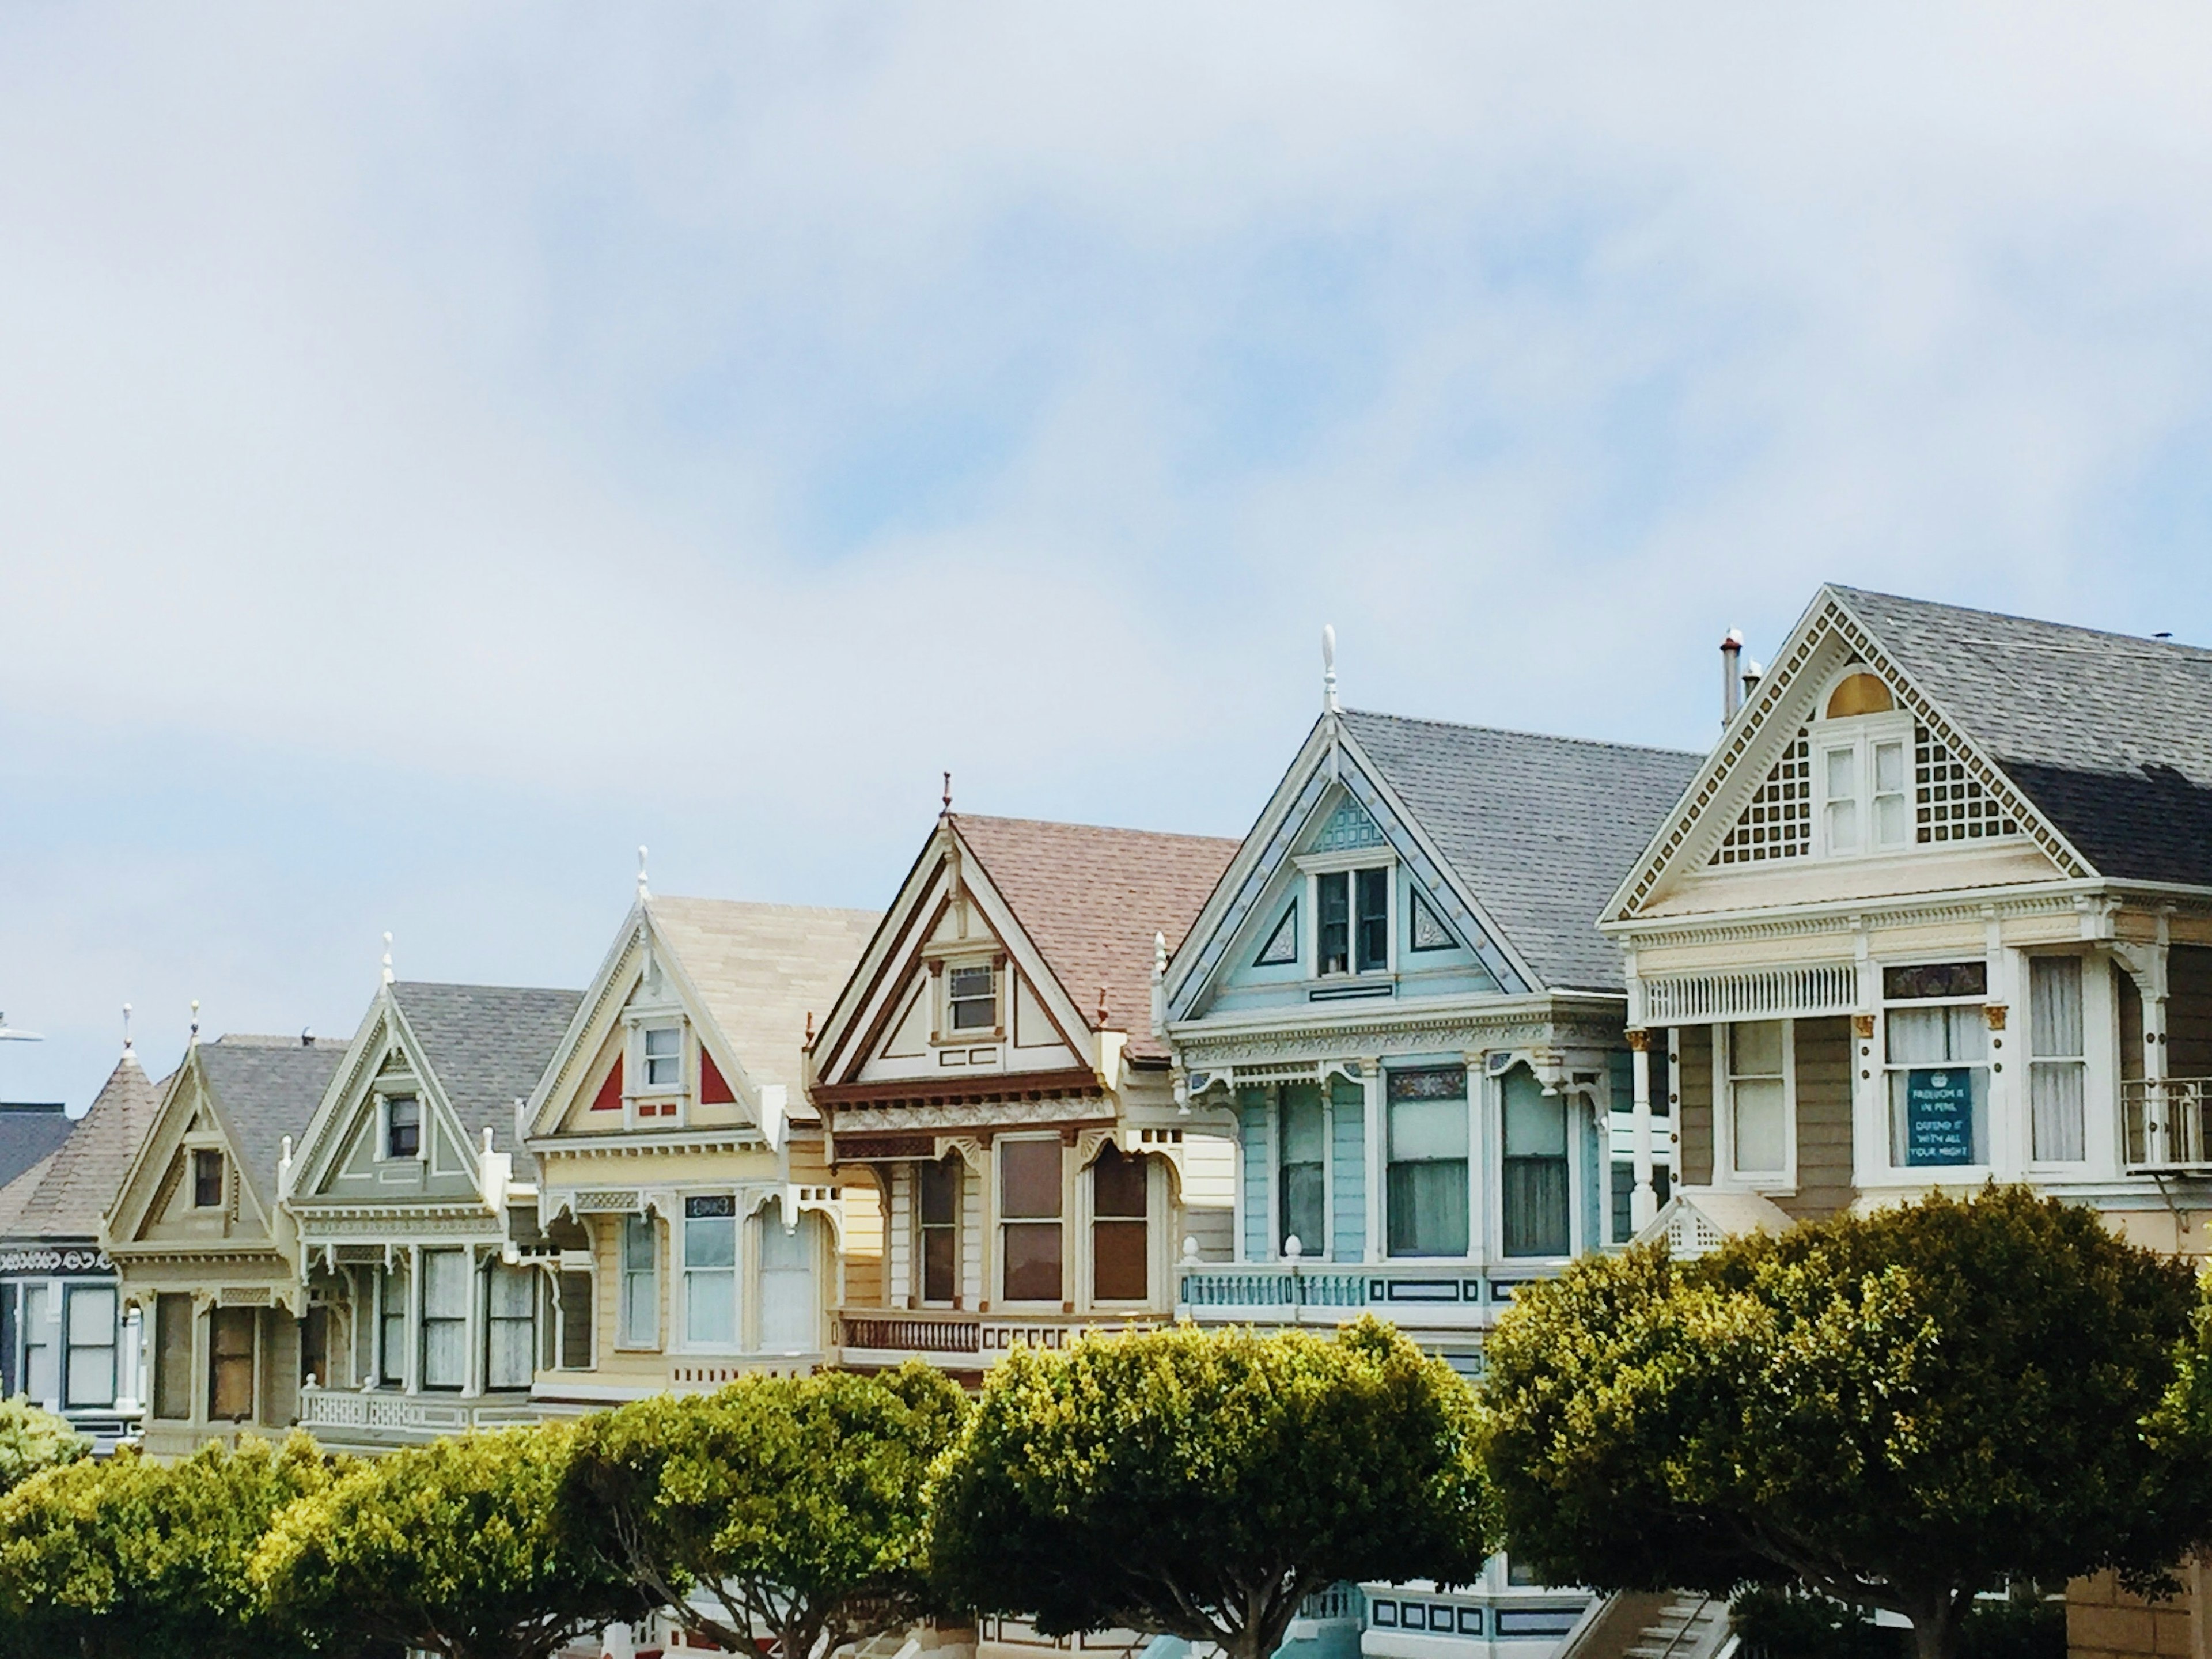 A row of homes you could acquire with down payment assistance